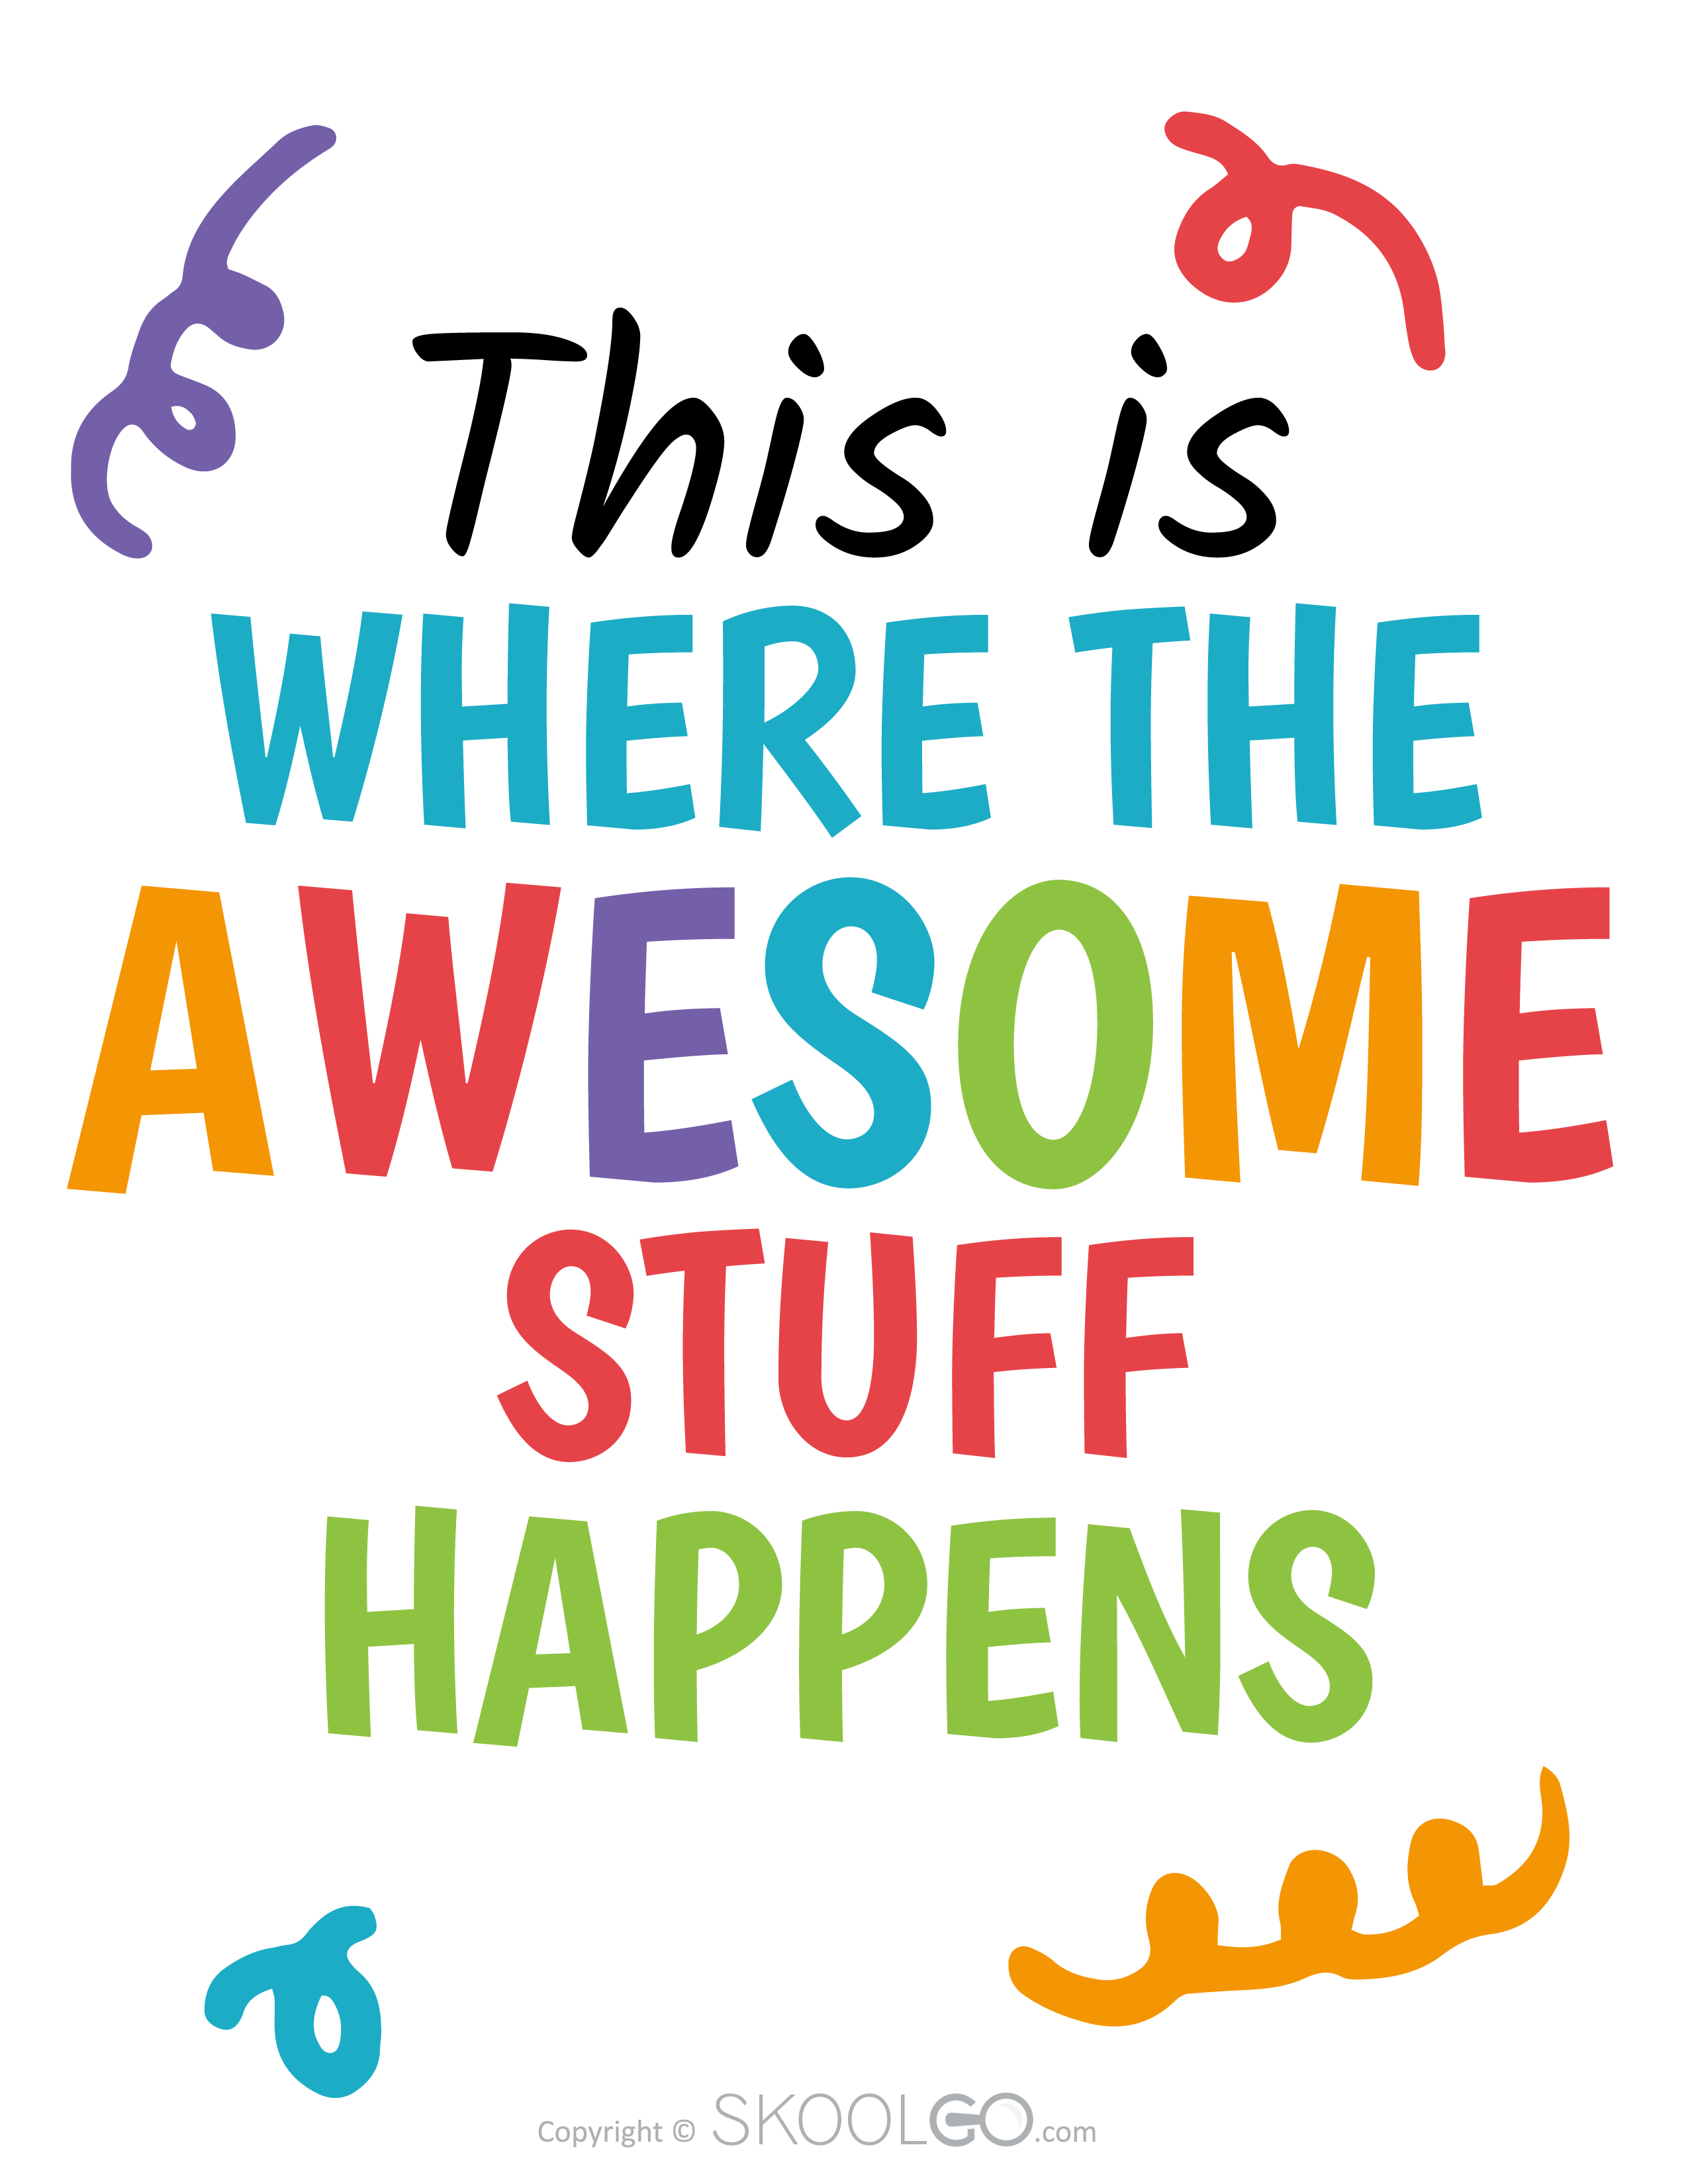 This is Where The Awesome Stuff Happens - Free Poster